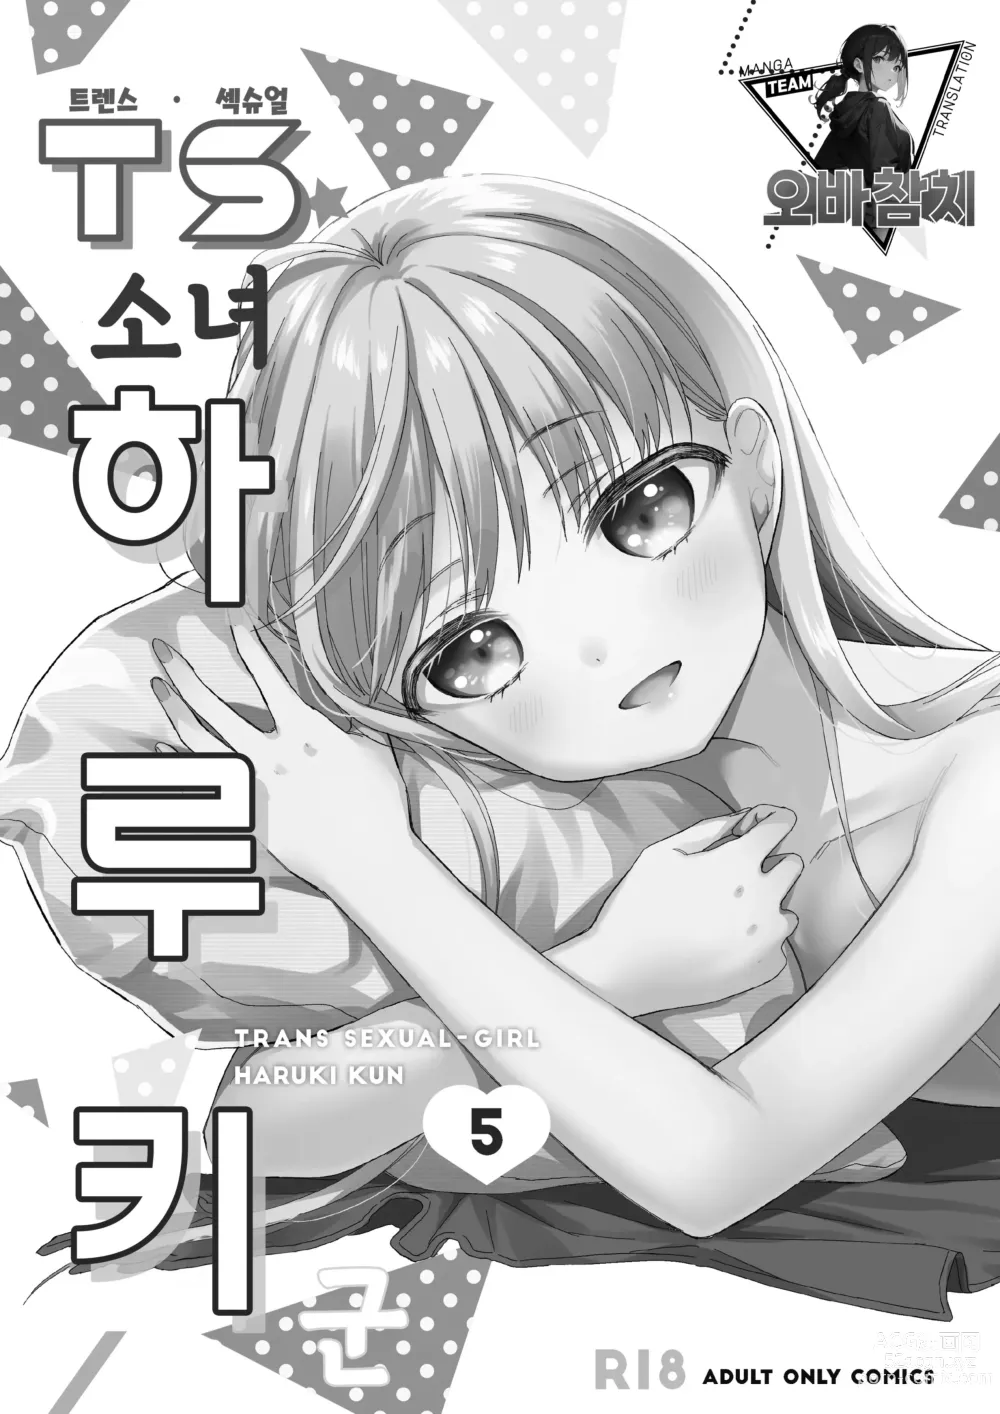 Page 2 of doujinshi TS소녀 하루키 군 5